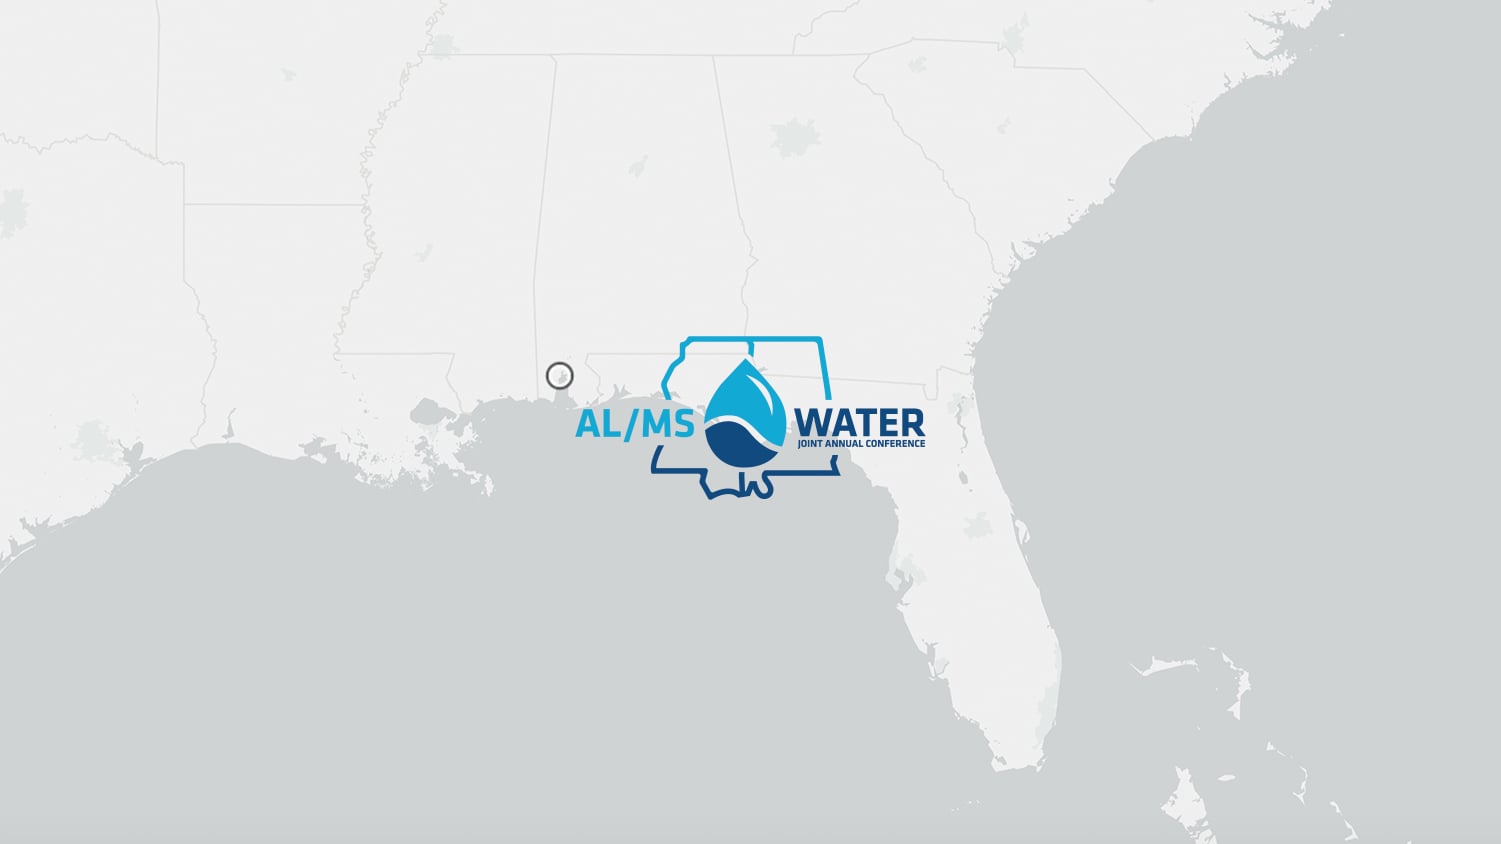 Eos Positioning Systems Exhibits at the Alabama / Mississippi Water Joint Annual Conference